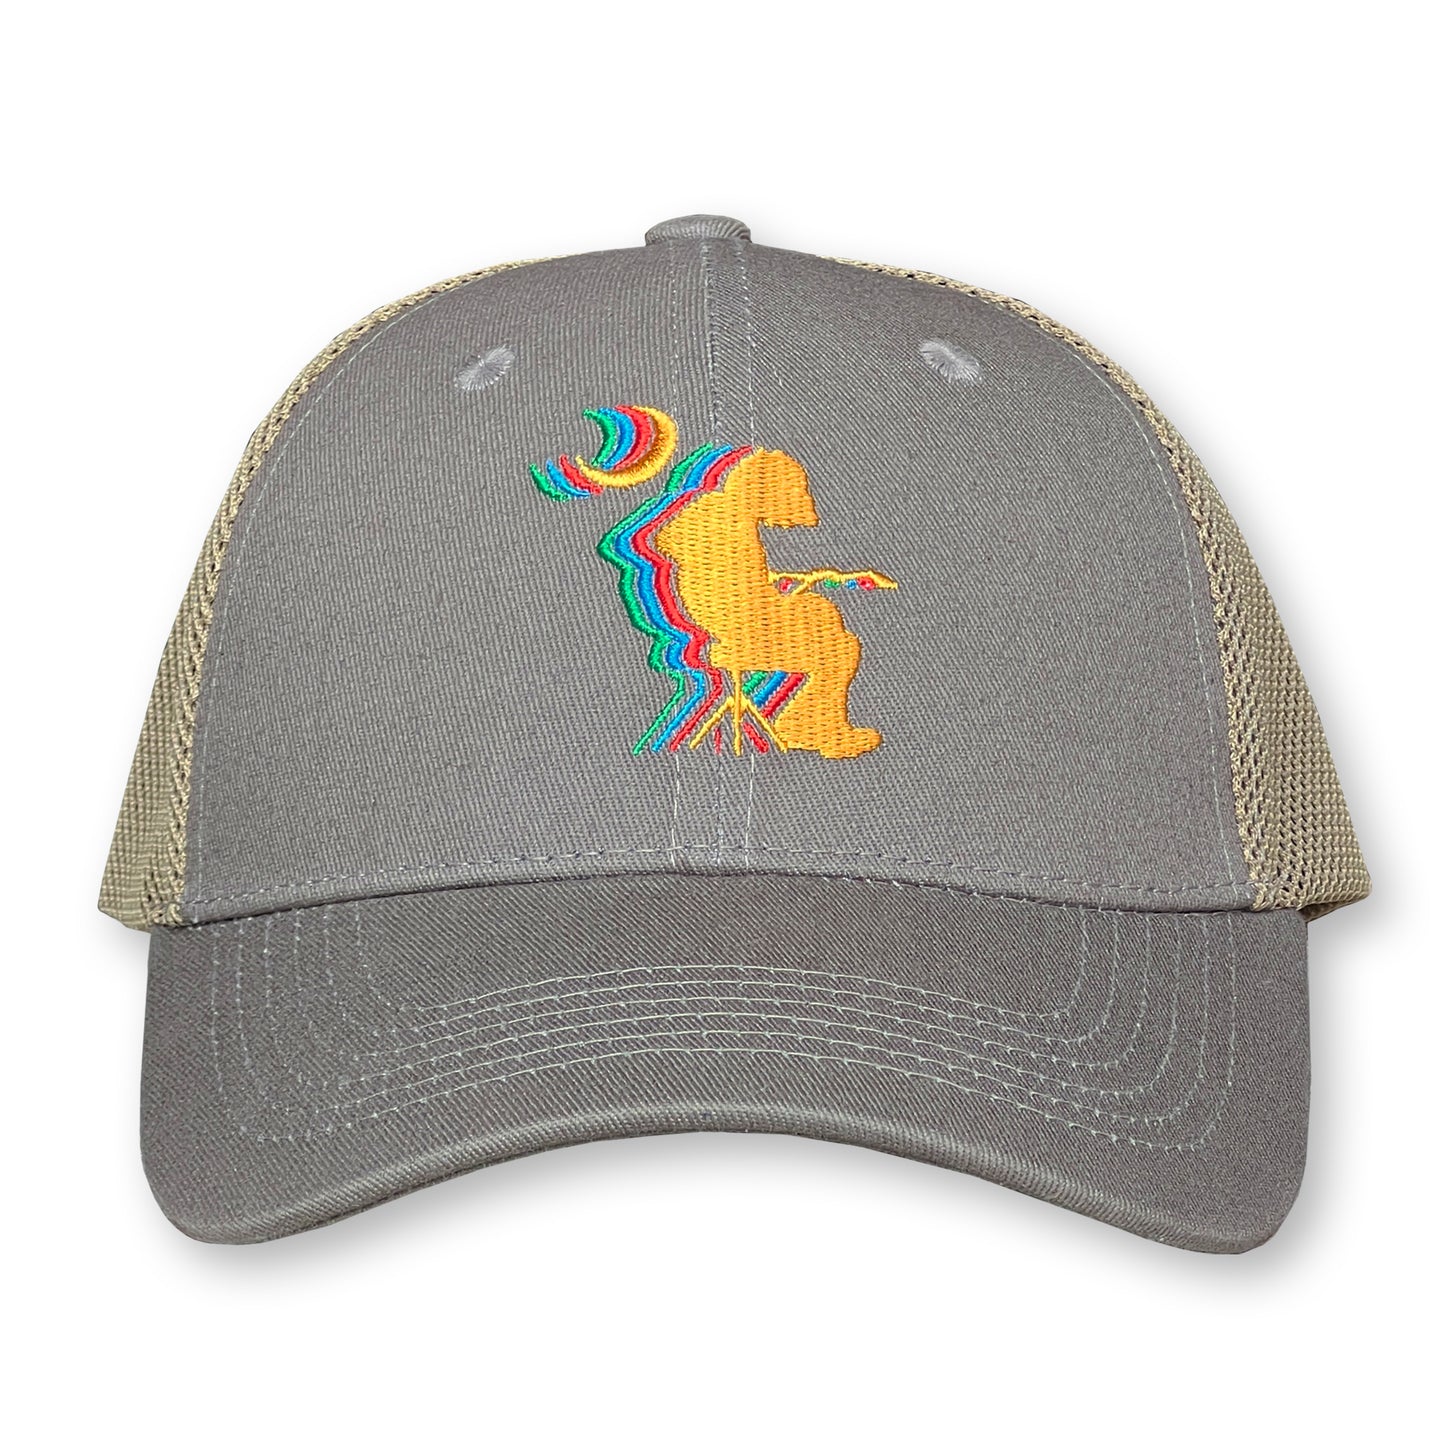 Widespread Panic Trucker Hat / Seal Cotton with Oat Mesh and Pumpkin Mikey